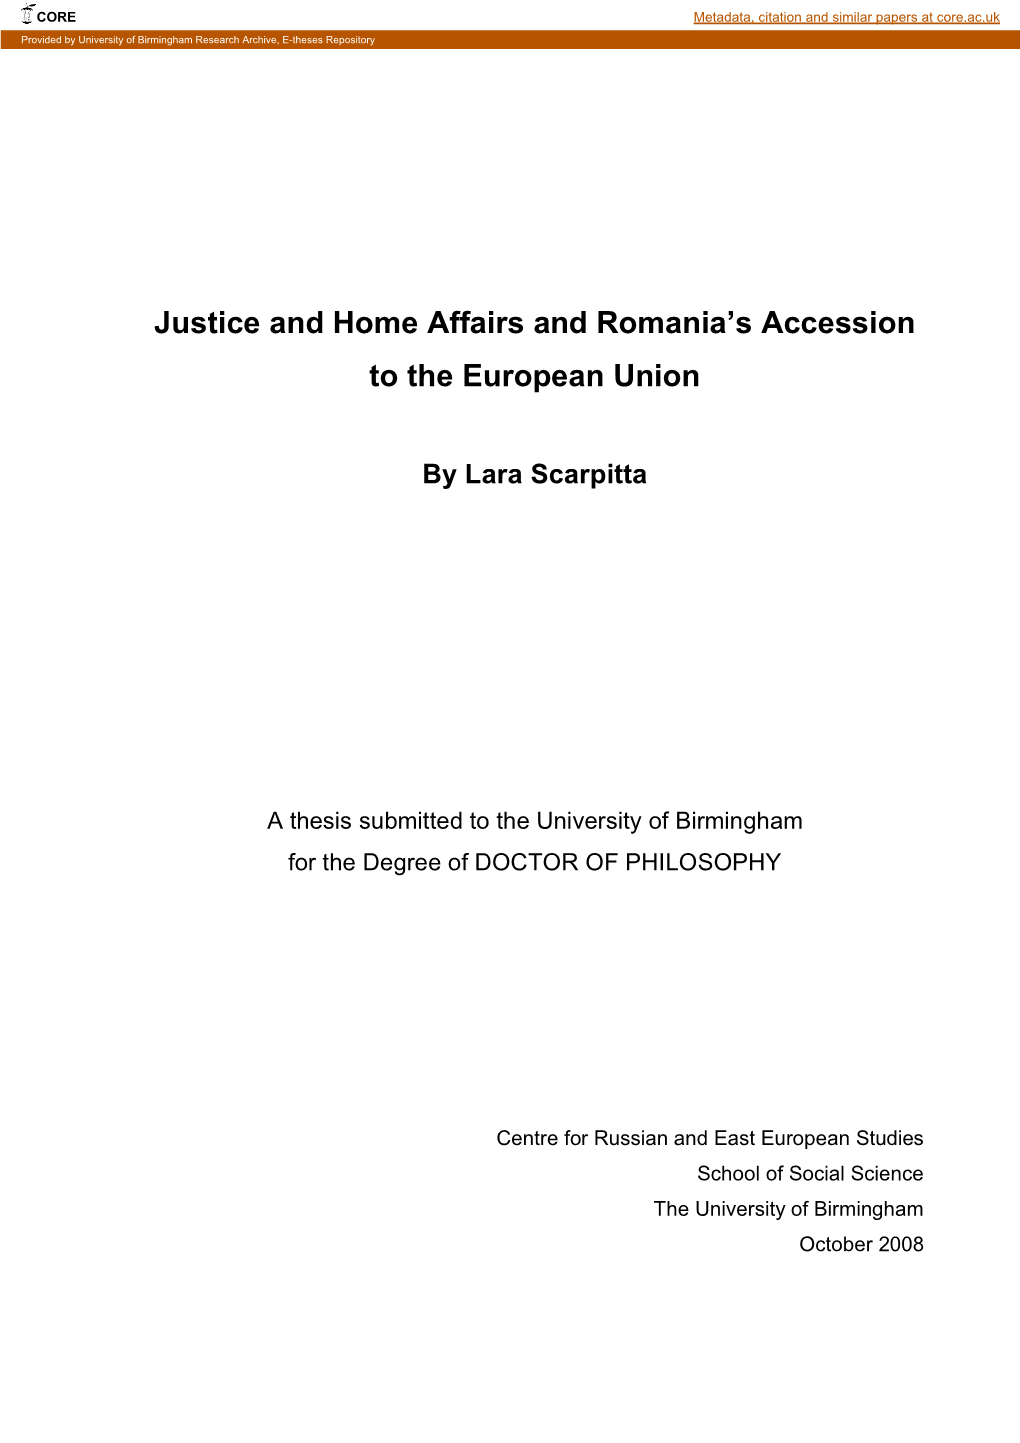 Justice and Home Affairs and Romania's Accession to The